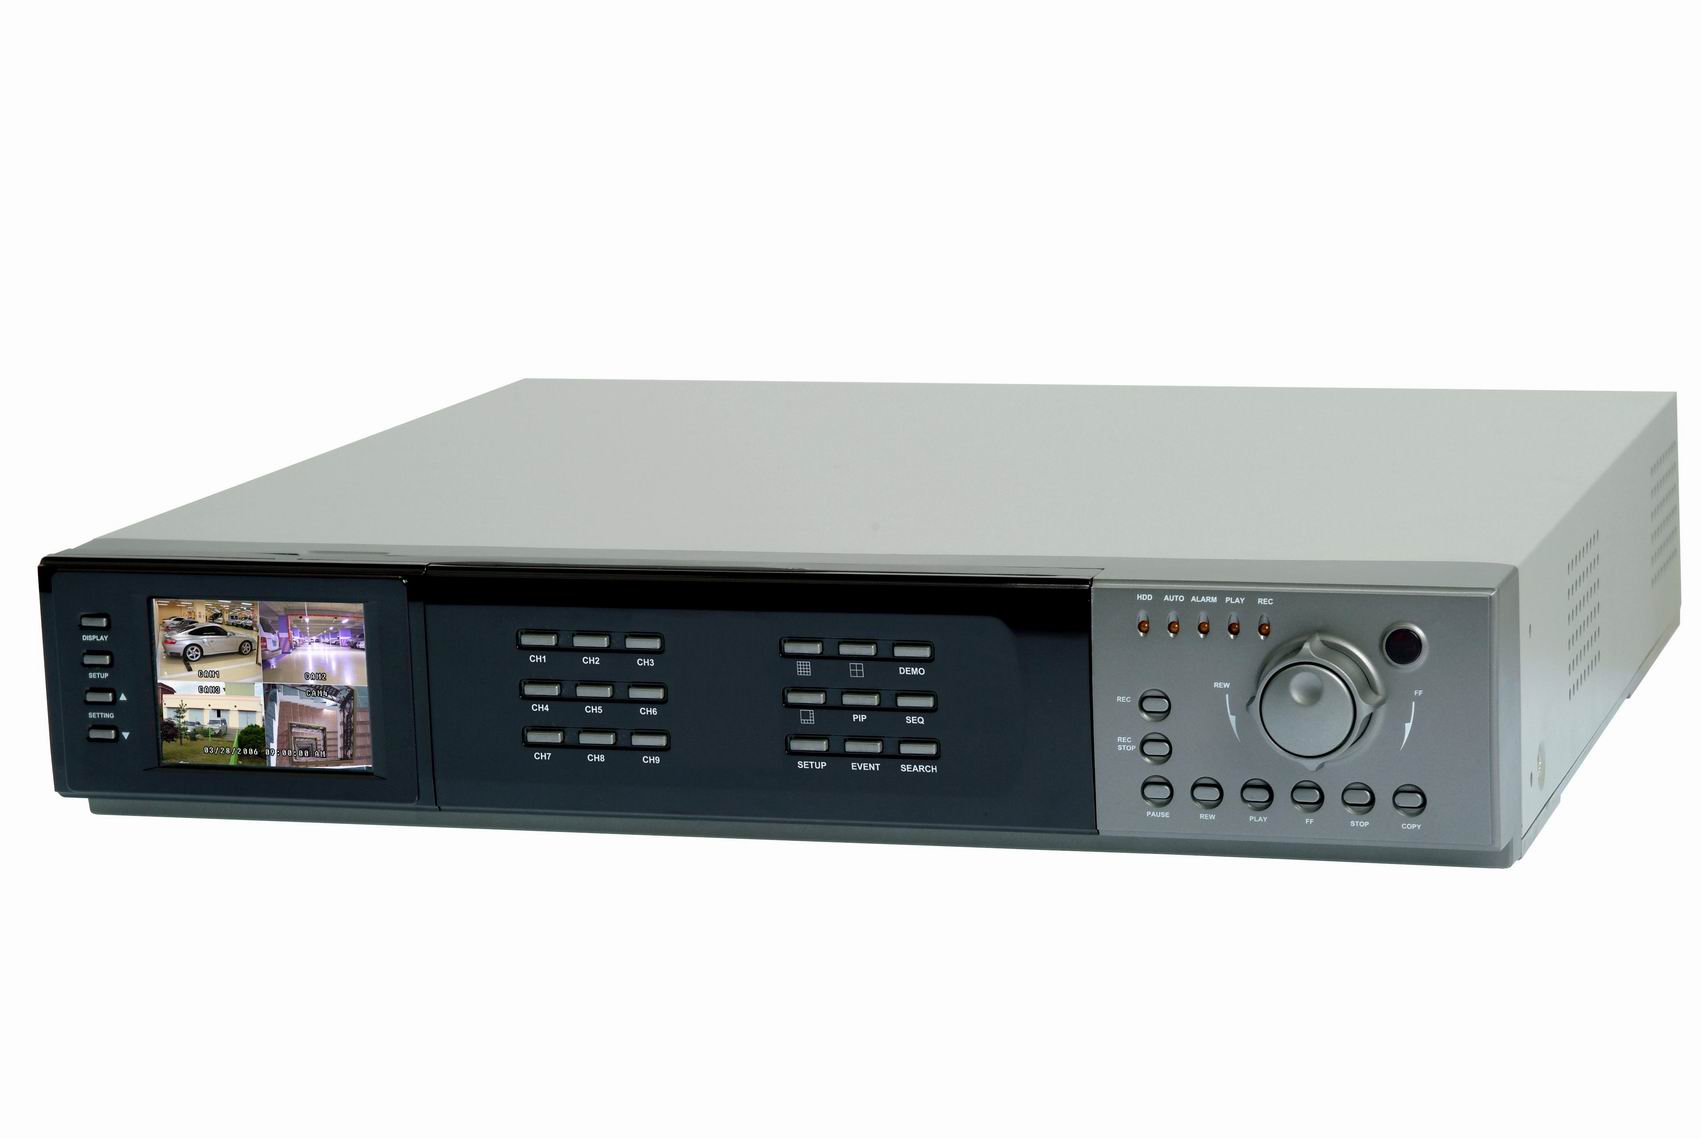  DVR Stand Alone (9ch, Mpeg4) -Bvr509 (DVR Stand Alone (9ch, MPEG4)-Bvr509)